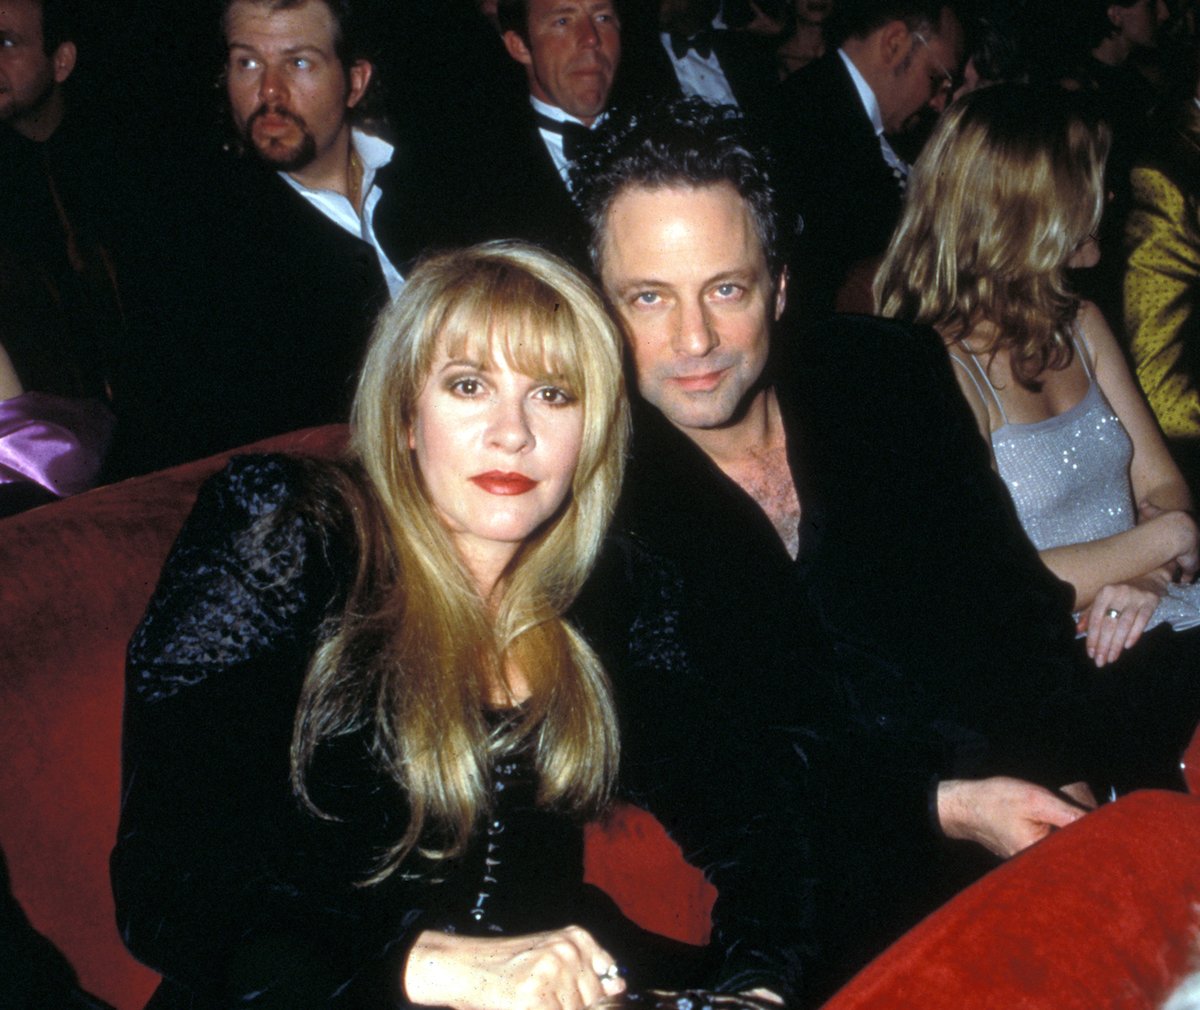 Former couple Stevie Nicks and Lindsey Buckingham, who wrote several Fleetwood Mac song lyrics about their breakup, pose for a photo together at an event.